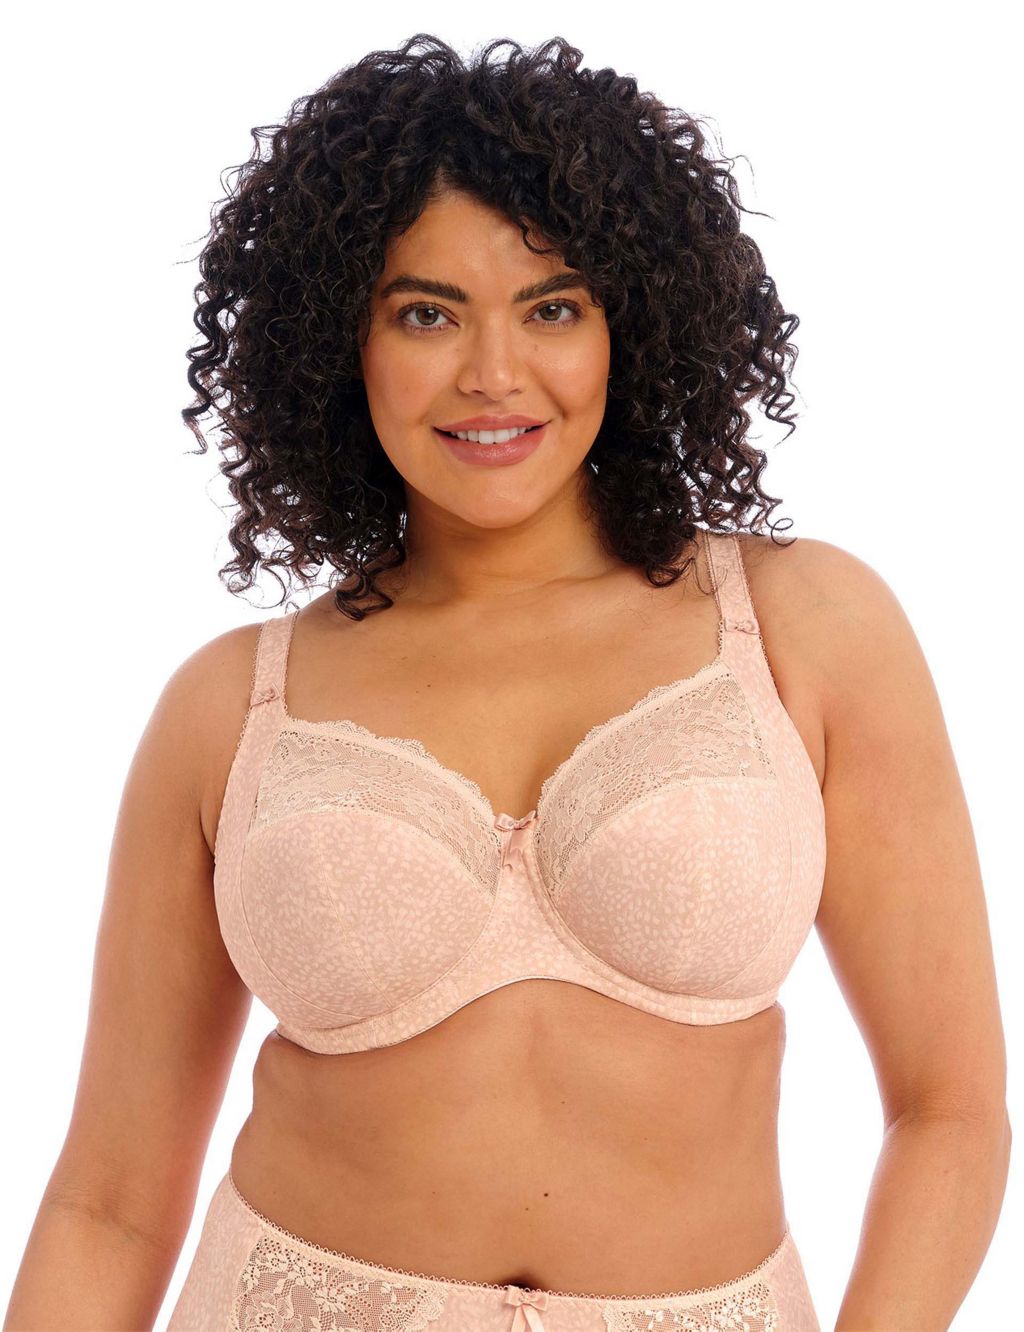 RRP £22.50 M&S 28A Padded Balcony Bra Strawberry Embroidered Mesh Pink Mix